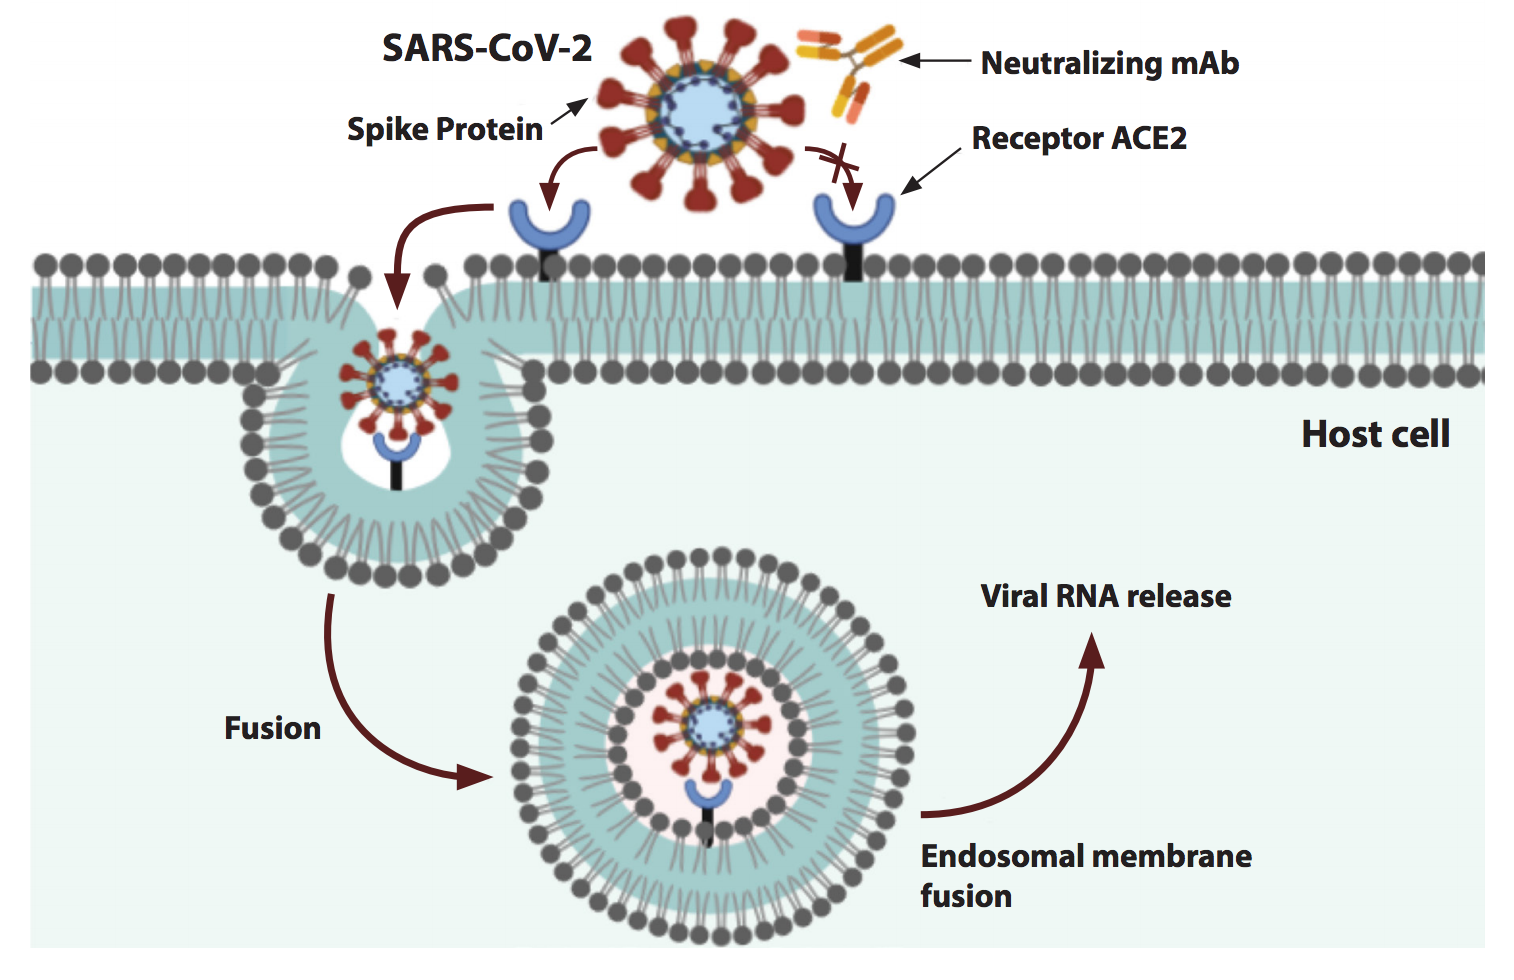 Competition of neutralizing antibodies with ACE2 for binding to the spike protein of SARS-CoV-2.